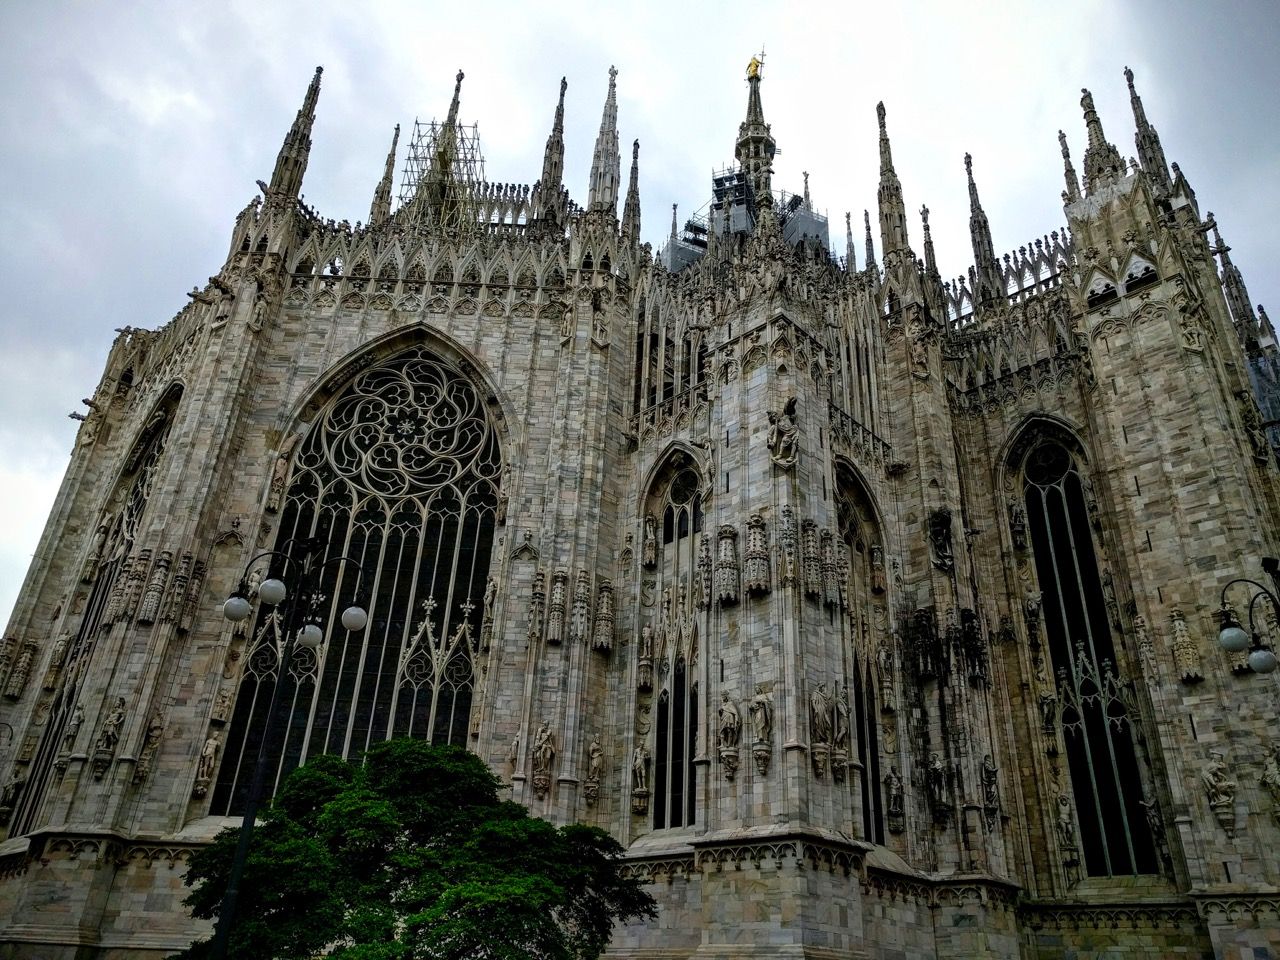 Back of the cathedral in Milan city center.